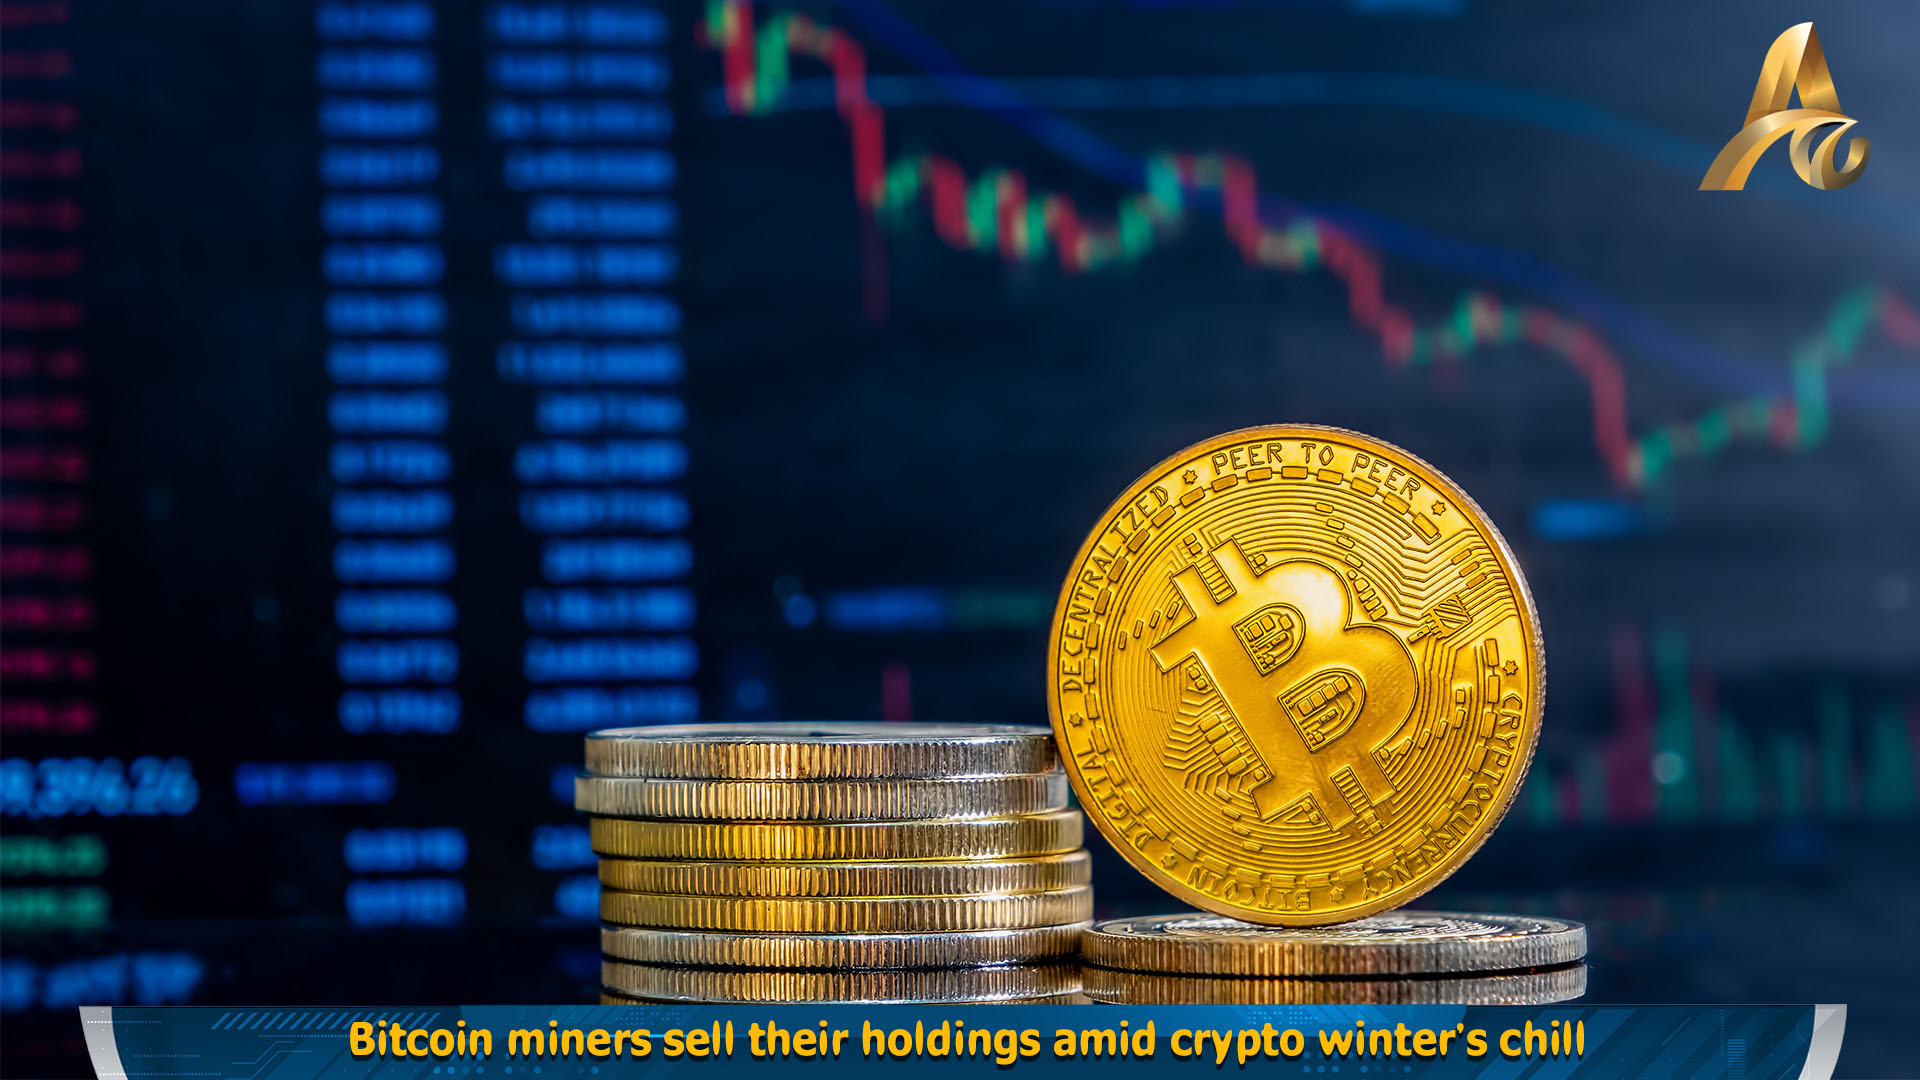 Bitcoin miners sell their holdings amid crypto winter's chill